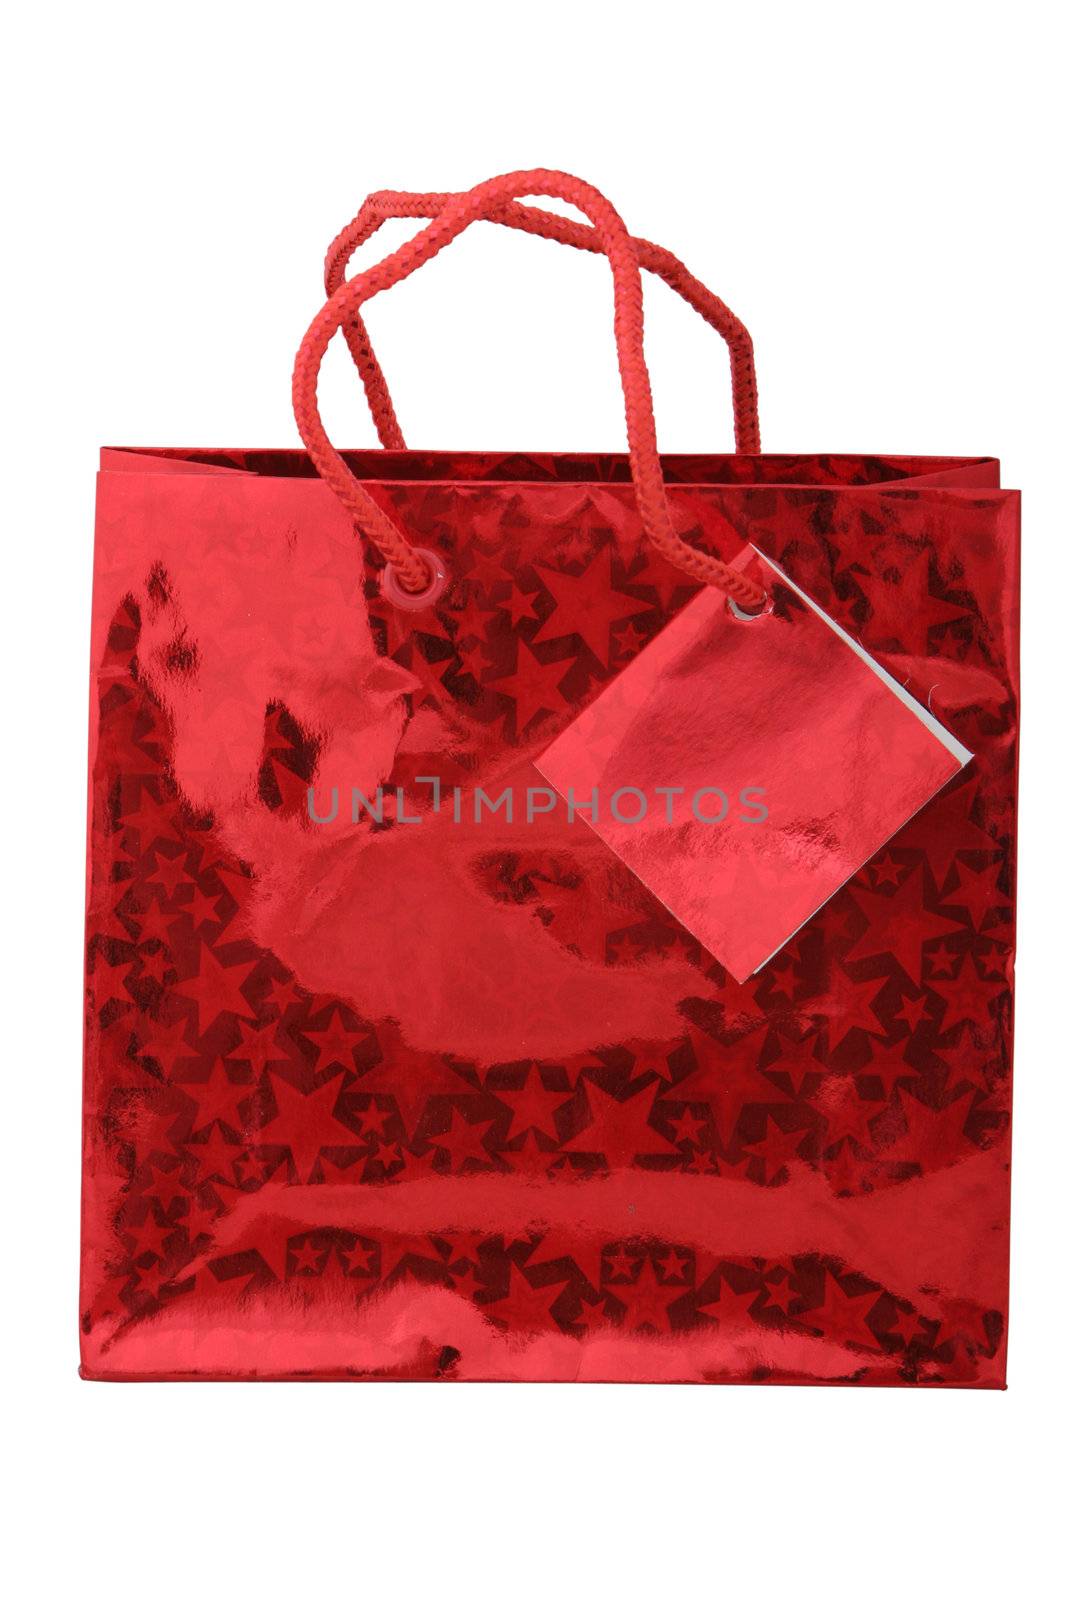 A red metalic giftbag with stars and a labeltag